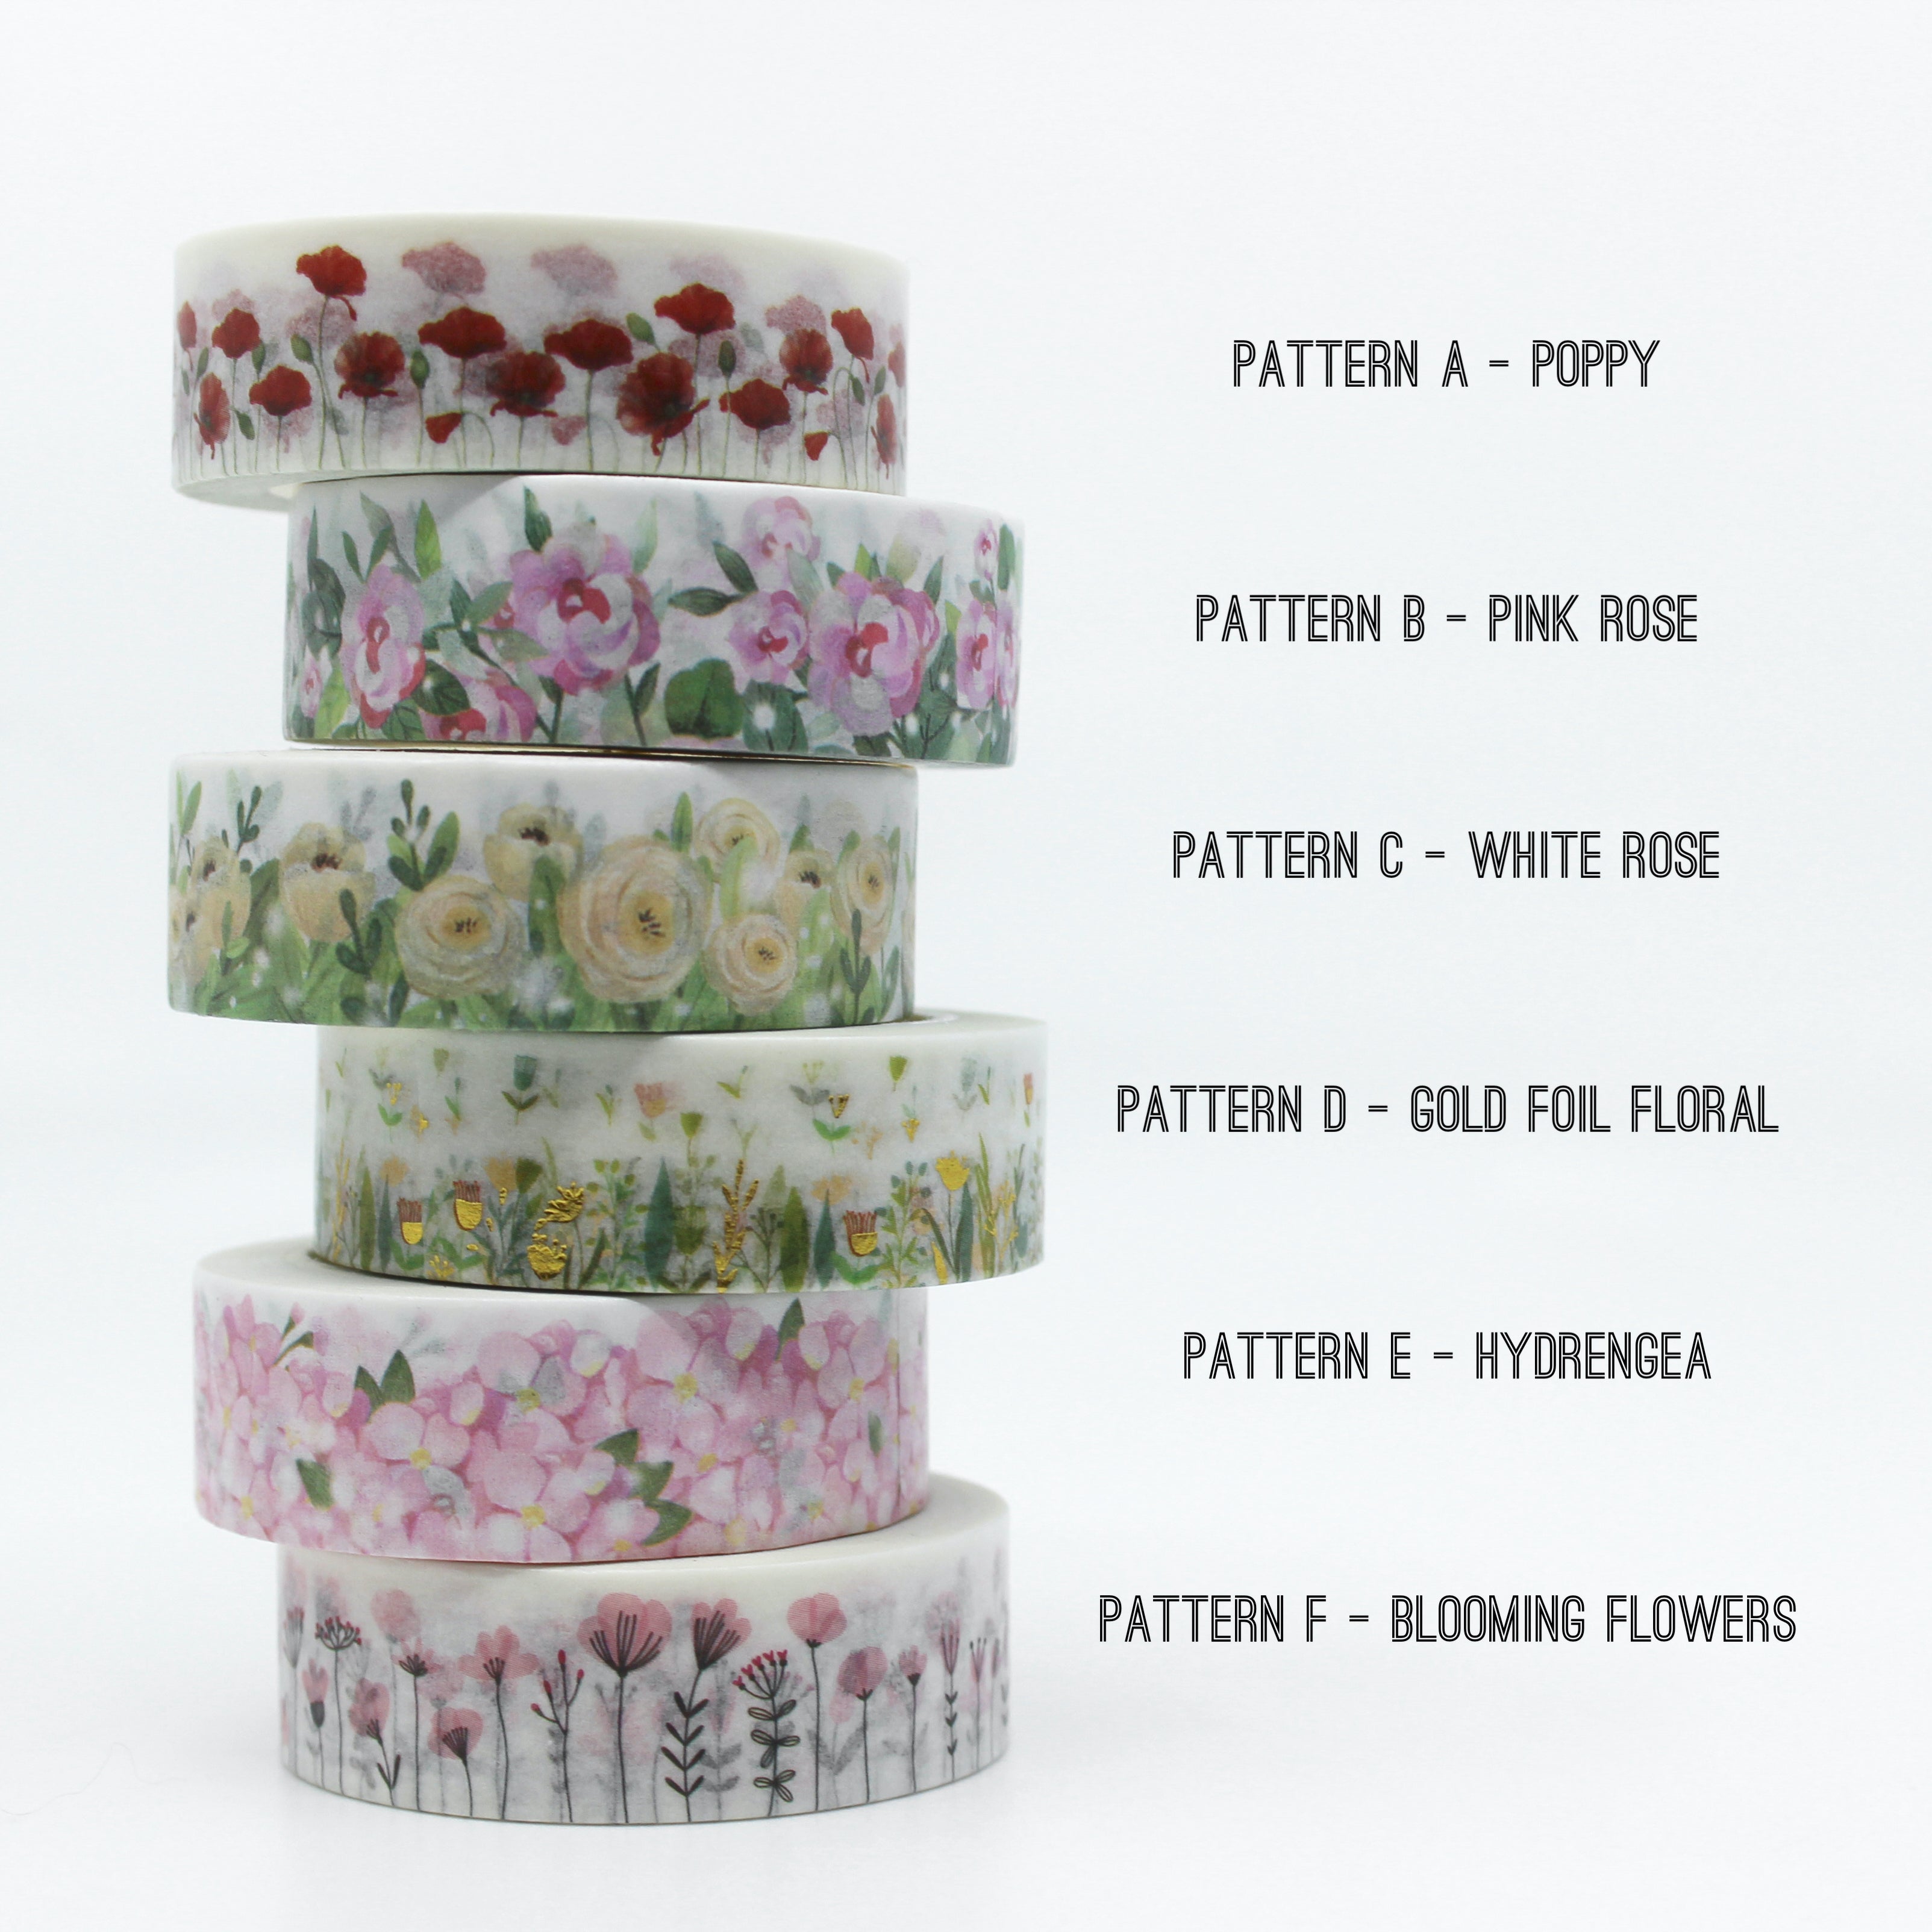 This is a cute pretty floral collections pattern washi tape for Journal Supplies, Scrapbooking washi tapes from BBB Supplies Craft Shop